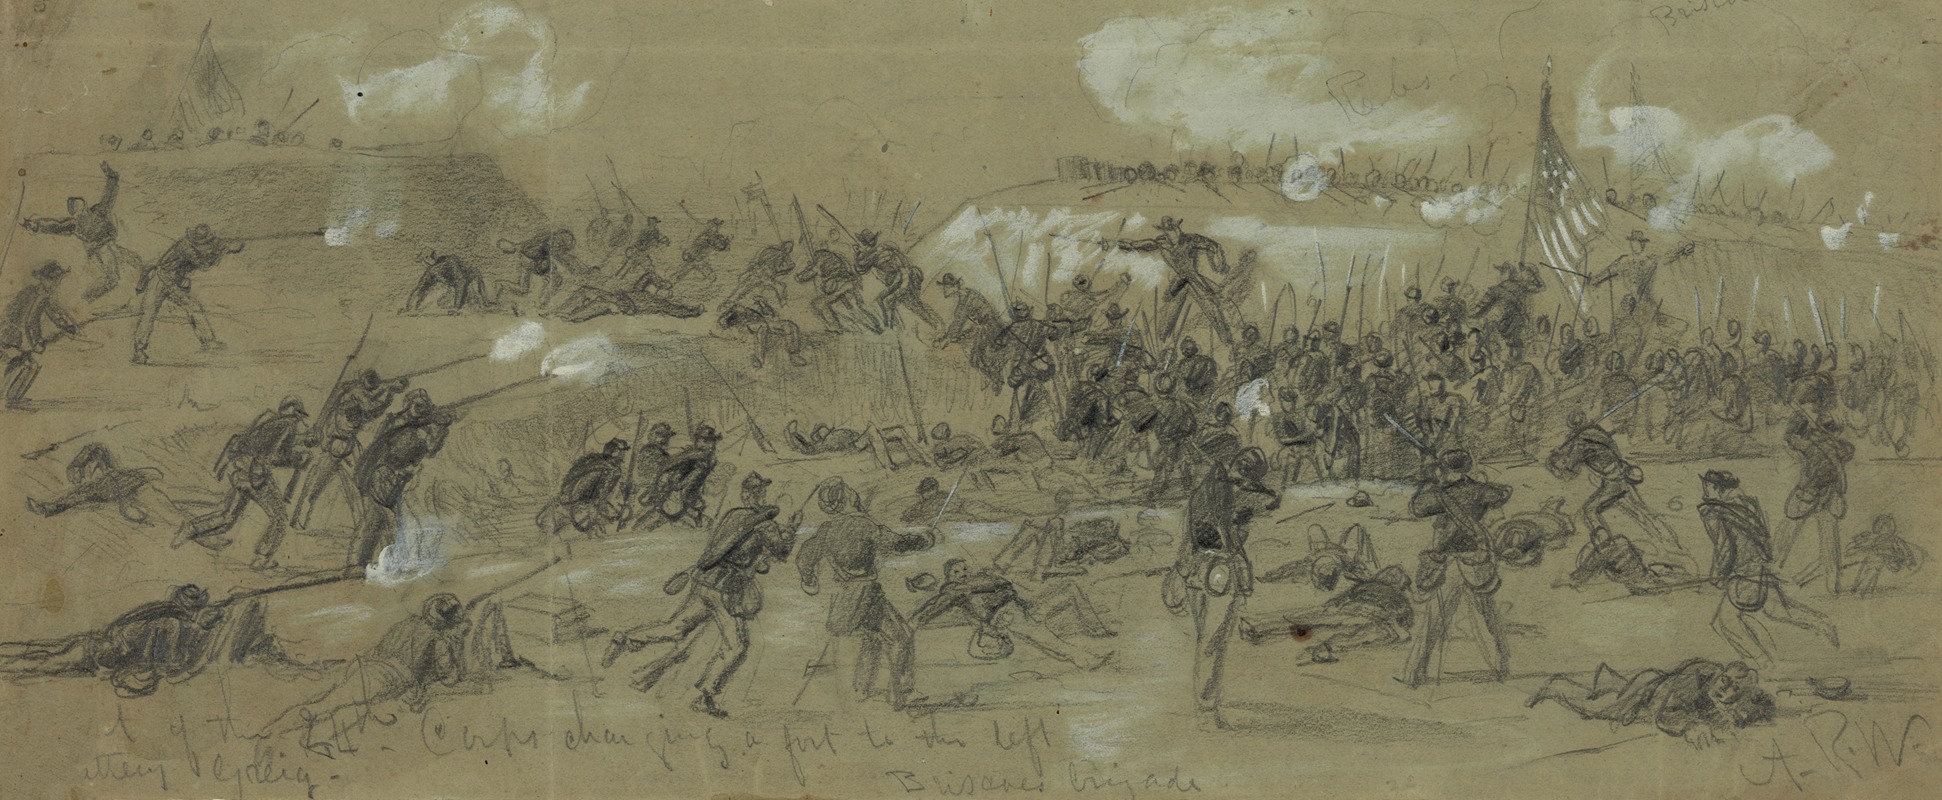 Alfred Rudolph Waud - The 24th Corps charging a fort to the left.